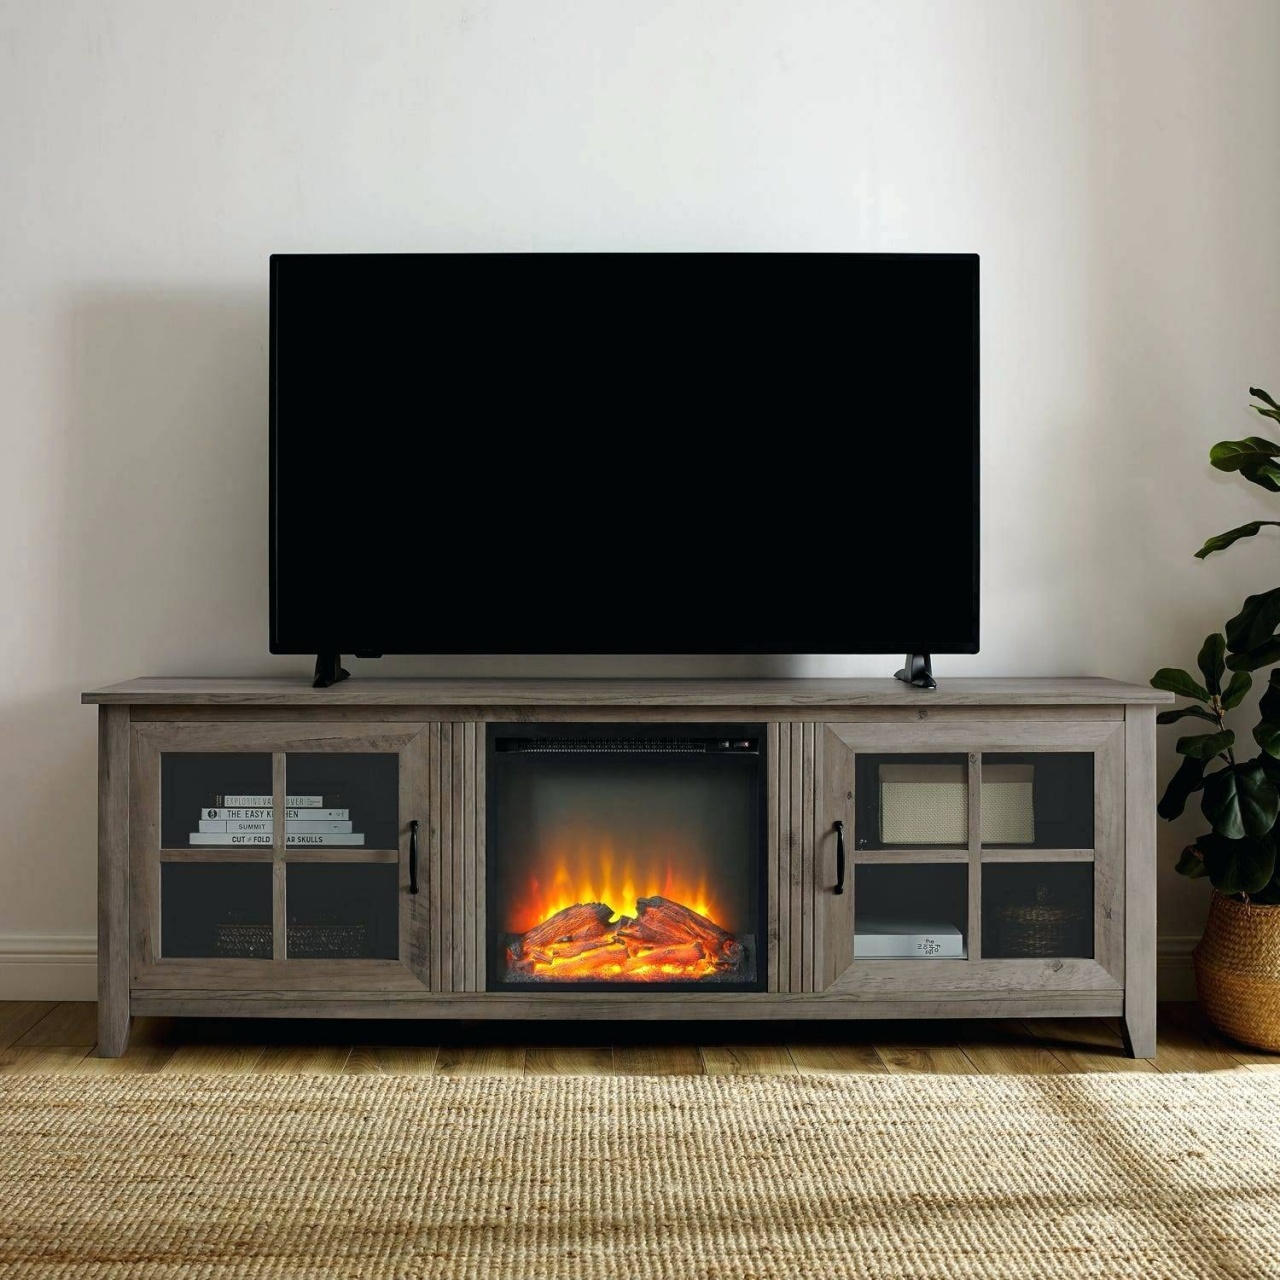 70 inch tv stand with fireplace buck fireplace insert petgeek from 70 inch tv stand with fireplace